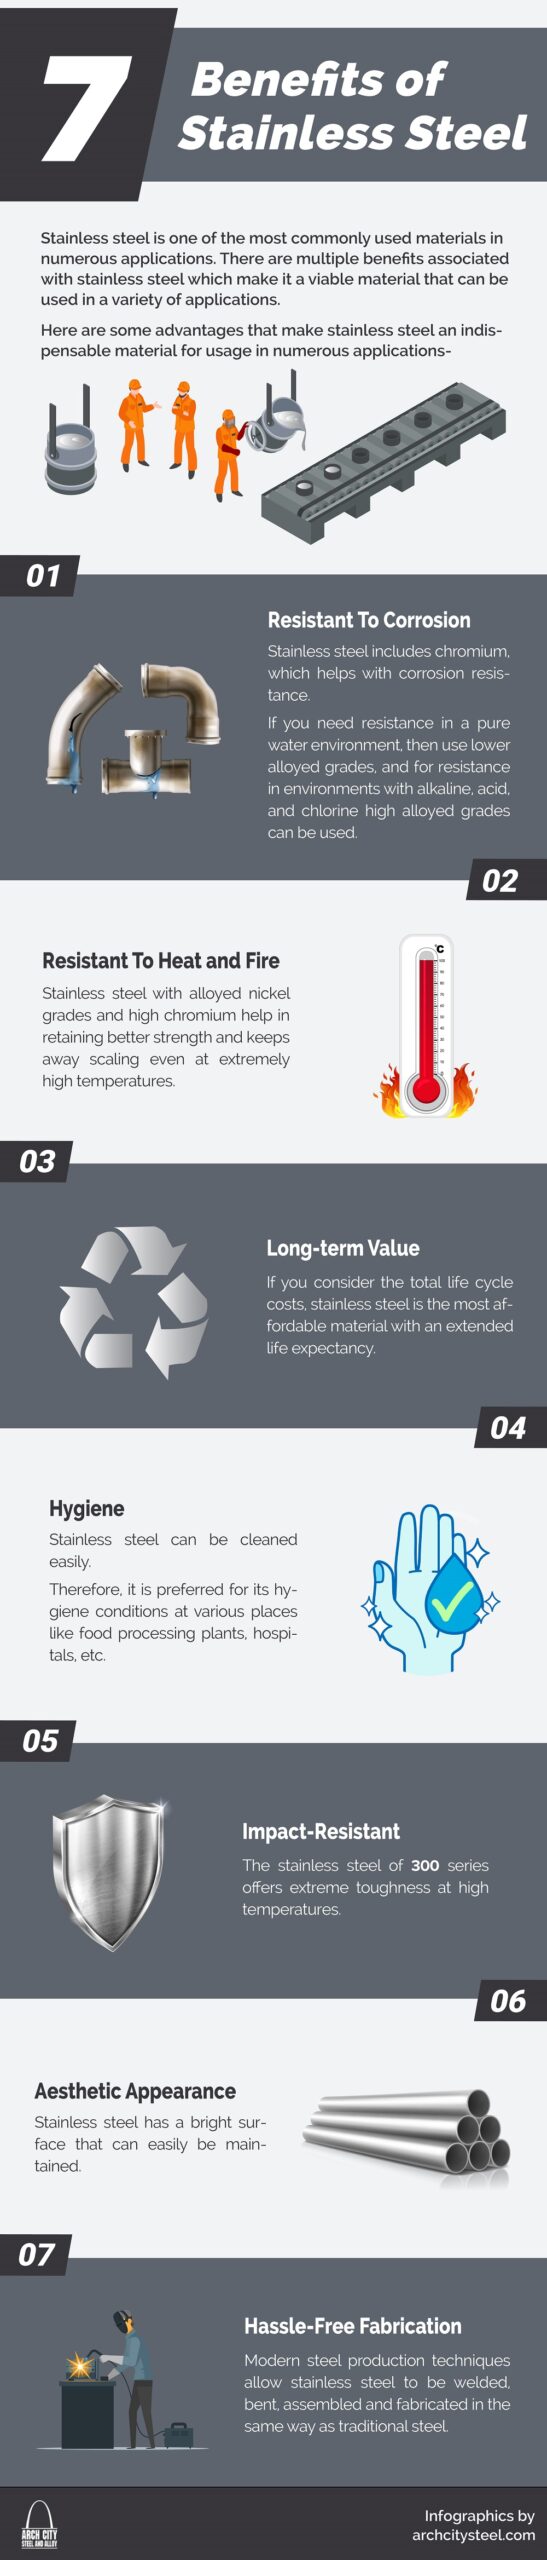 7 Benefits of Stainless Steel - Infographic